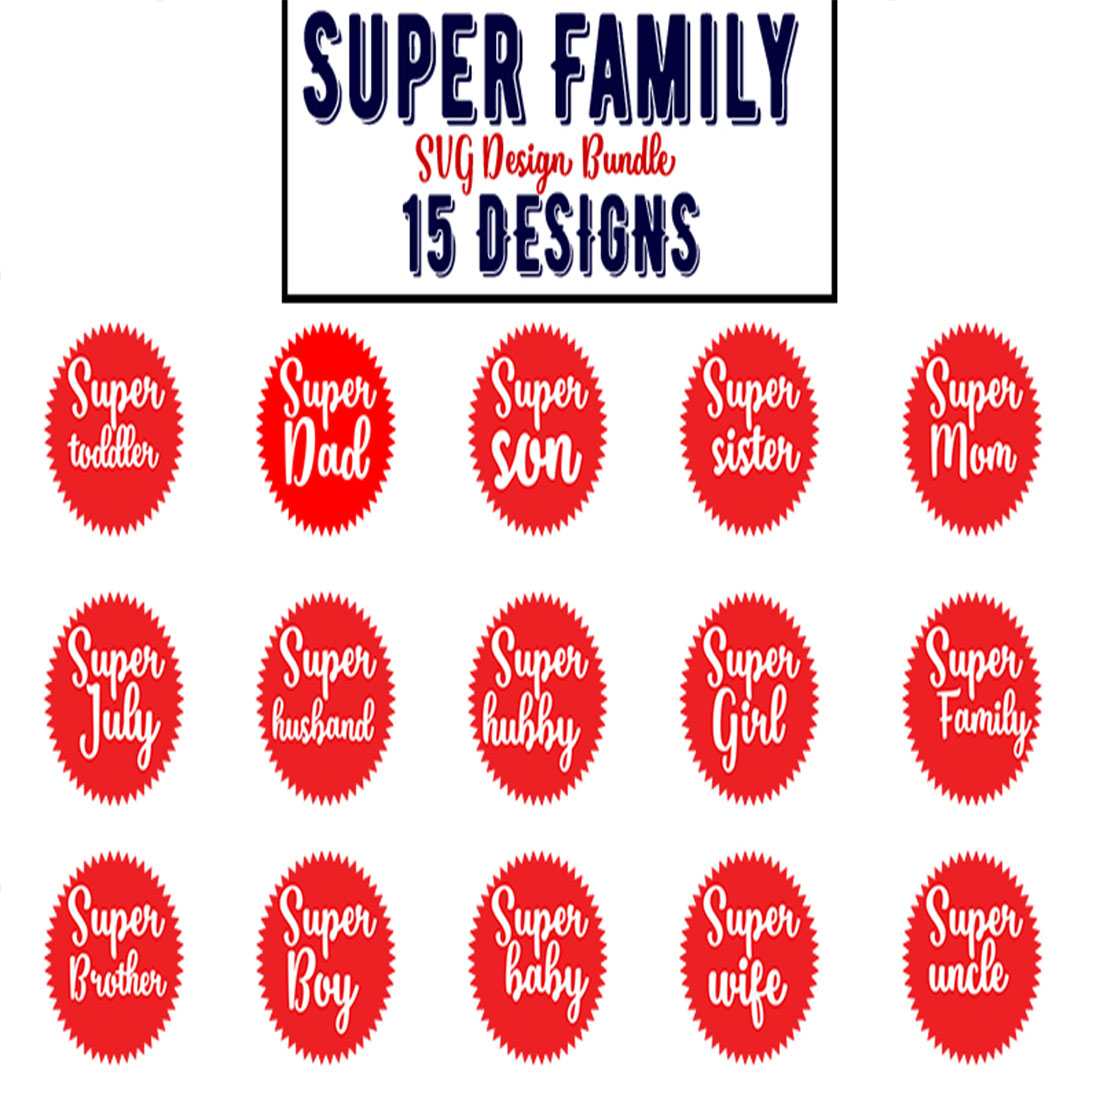 Bunch of red stickers with the words super family on them.